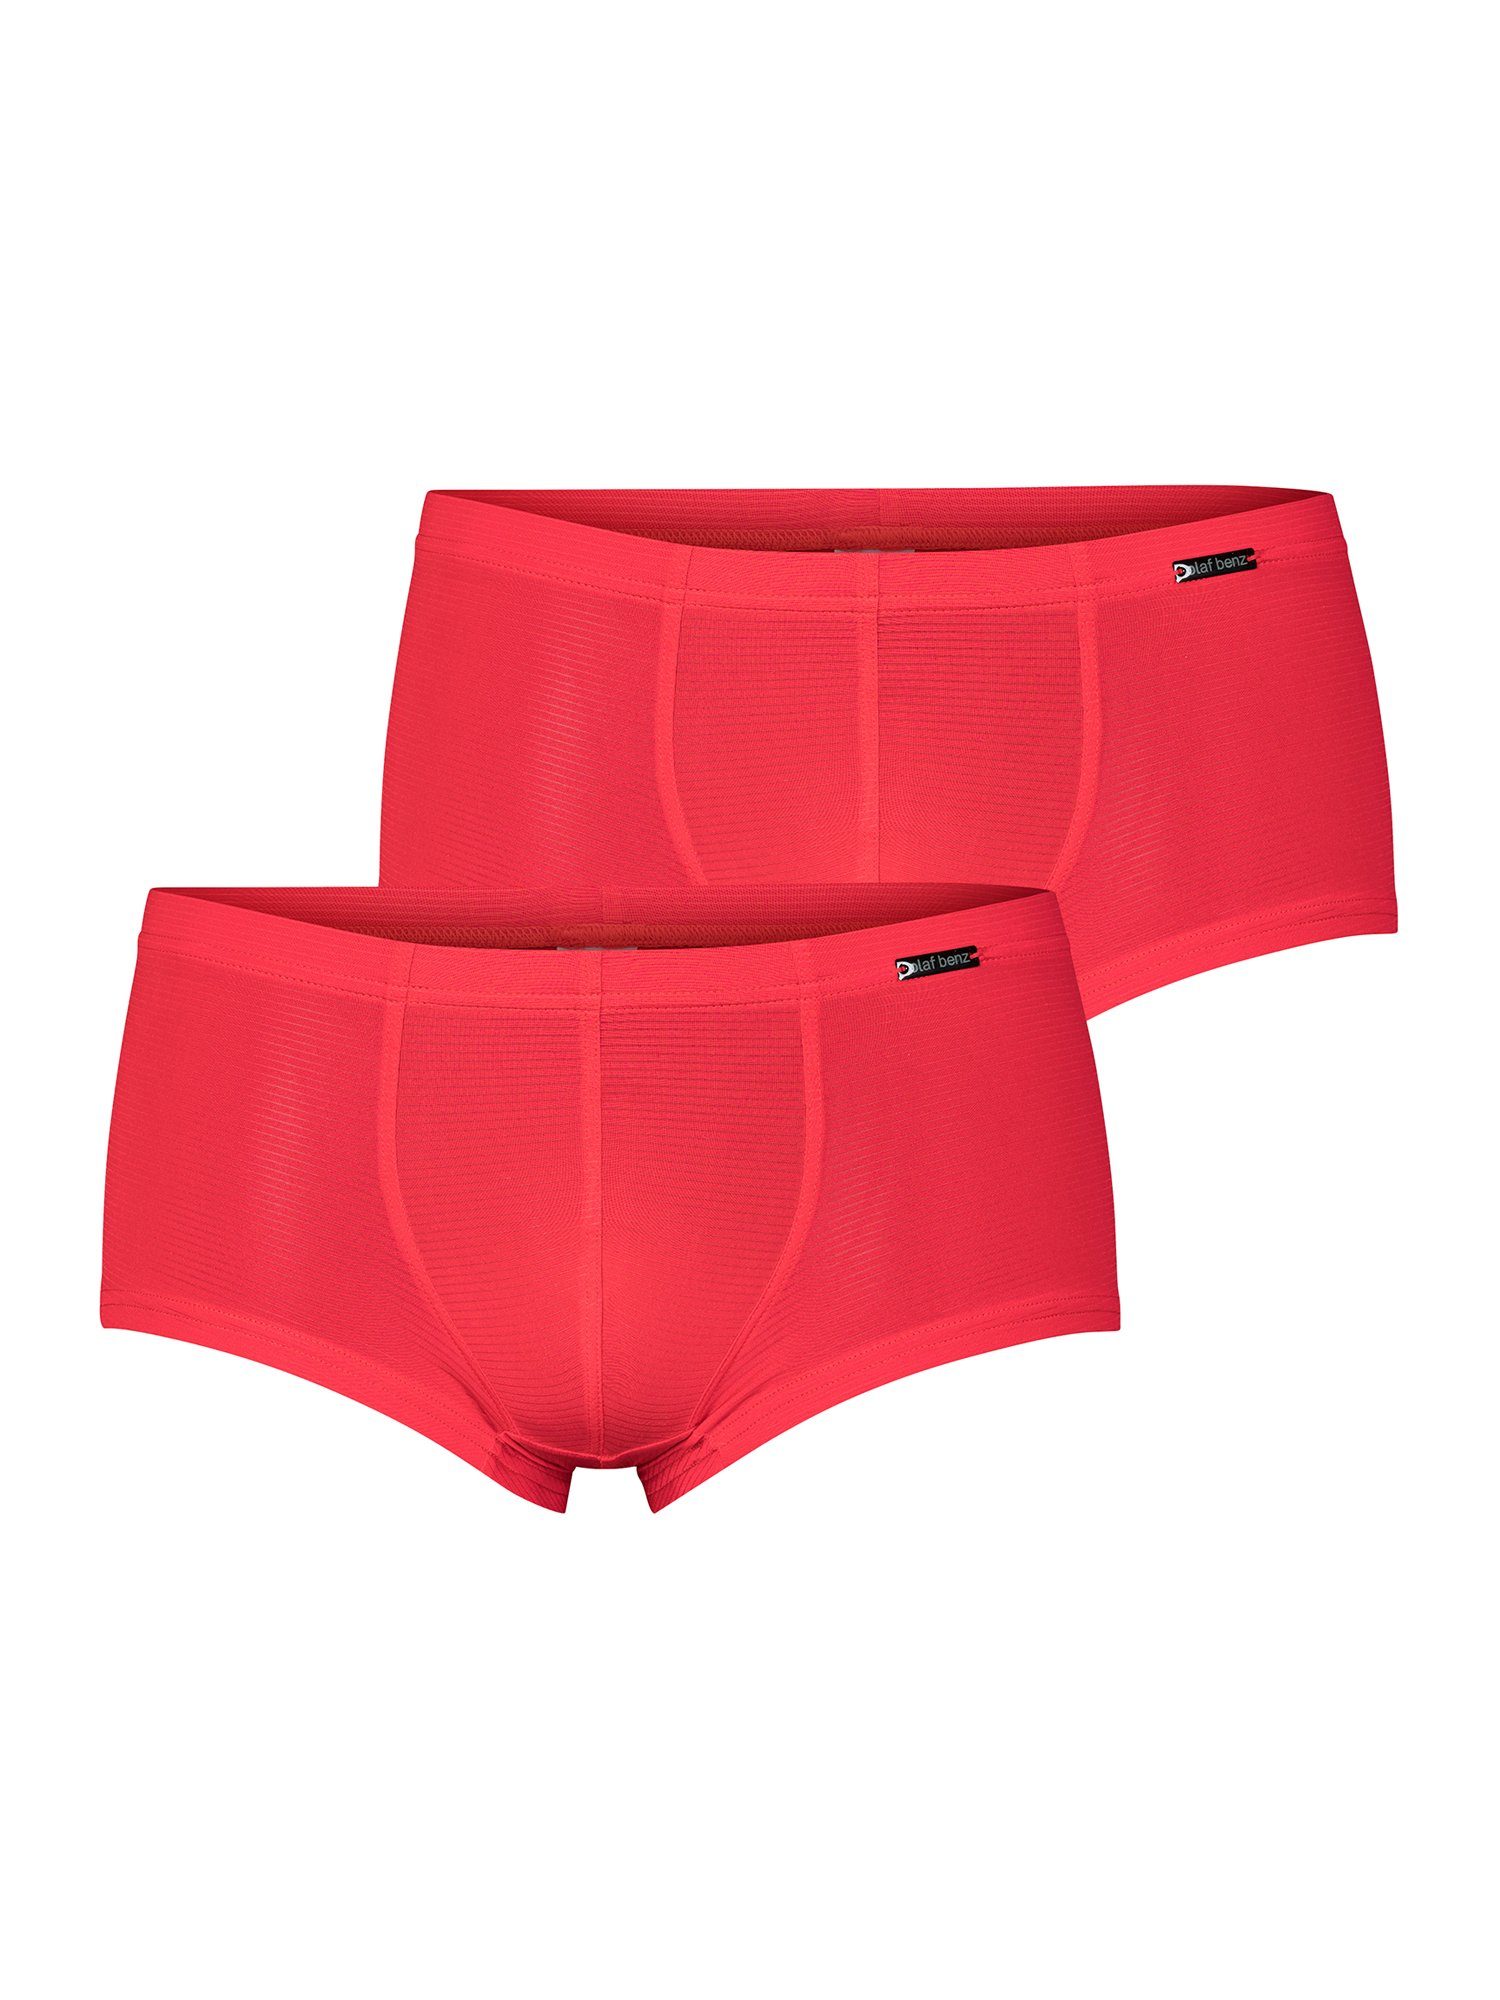 Olaf Benz Retro Pants Retropants RED 1201 2-Pack rot